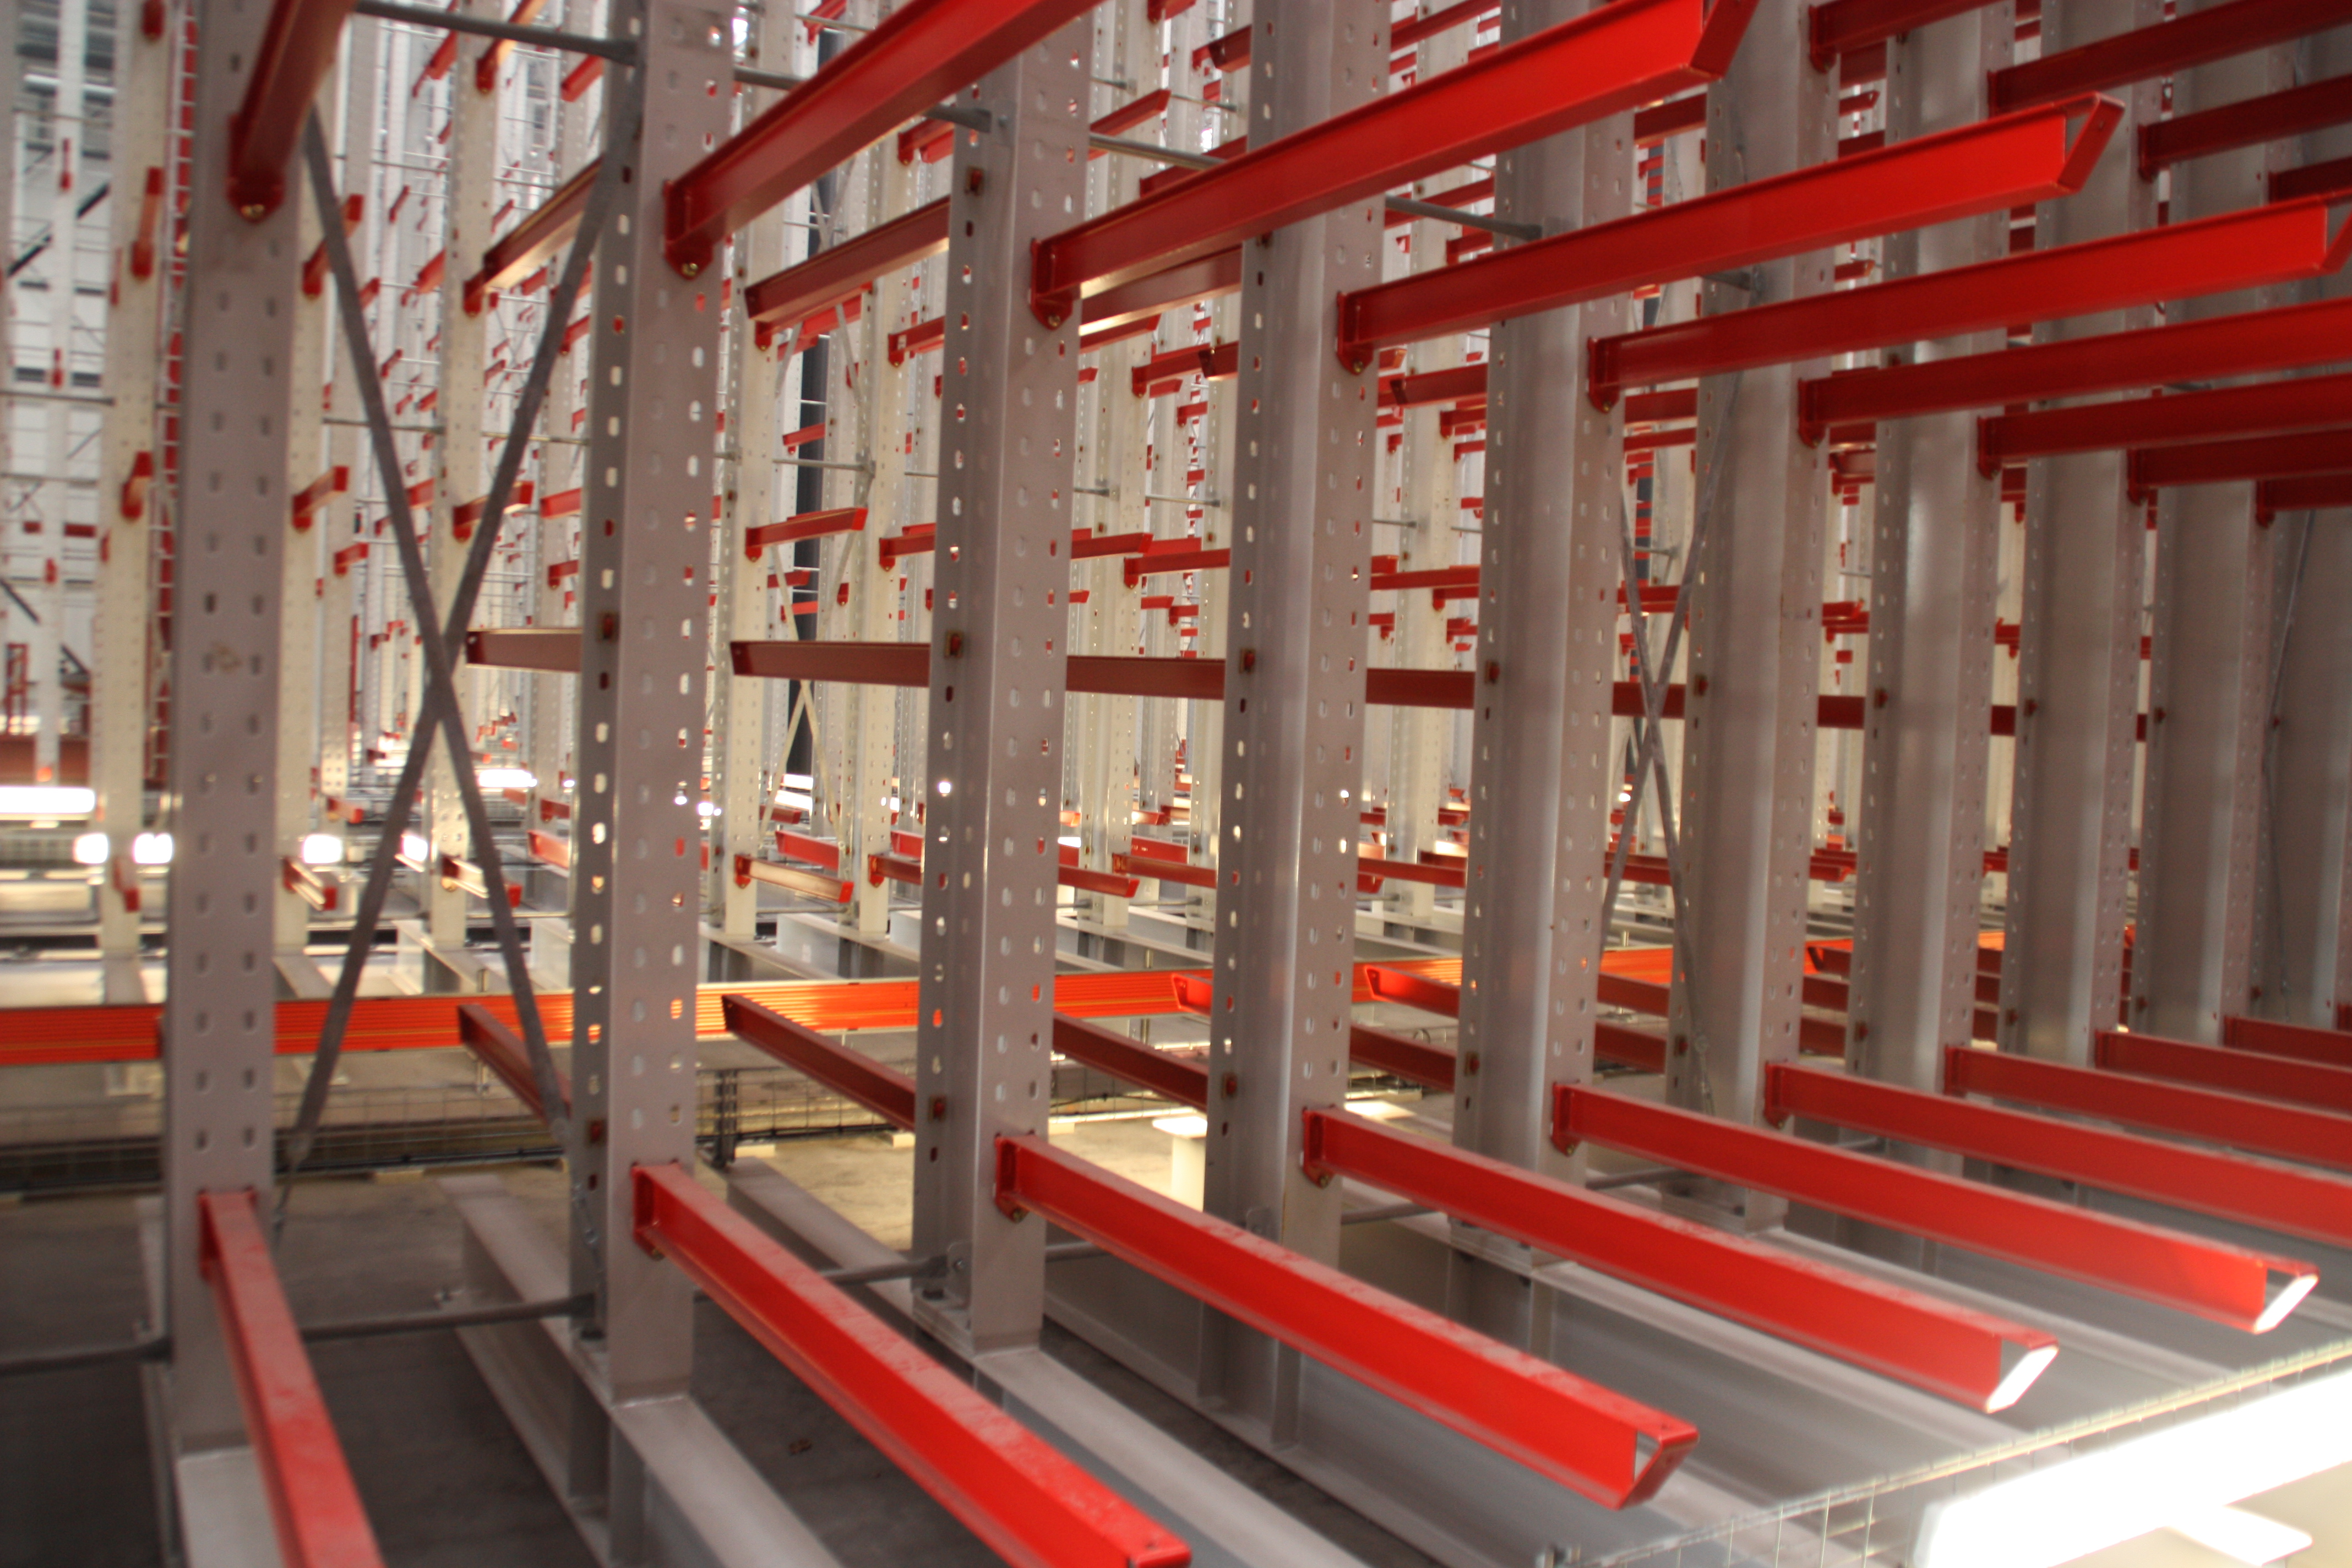 [Translate "Spain"] Cantilever racking system